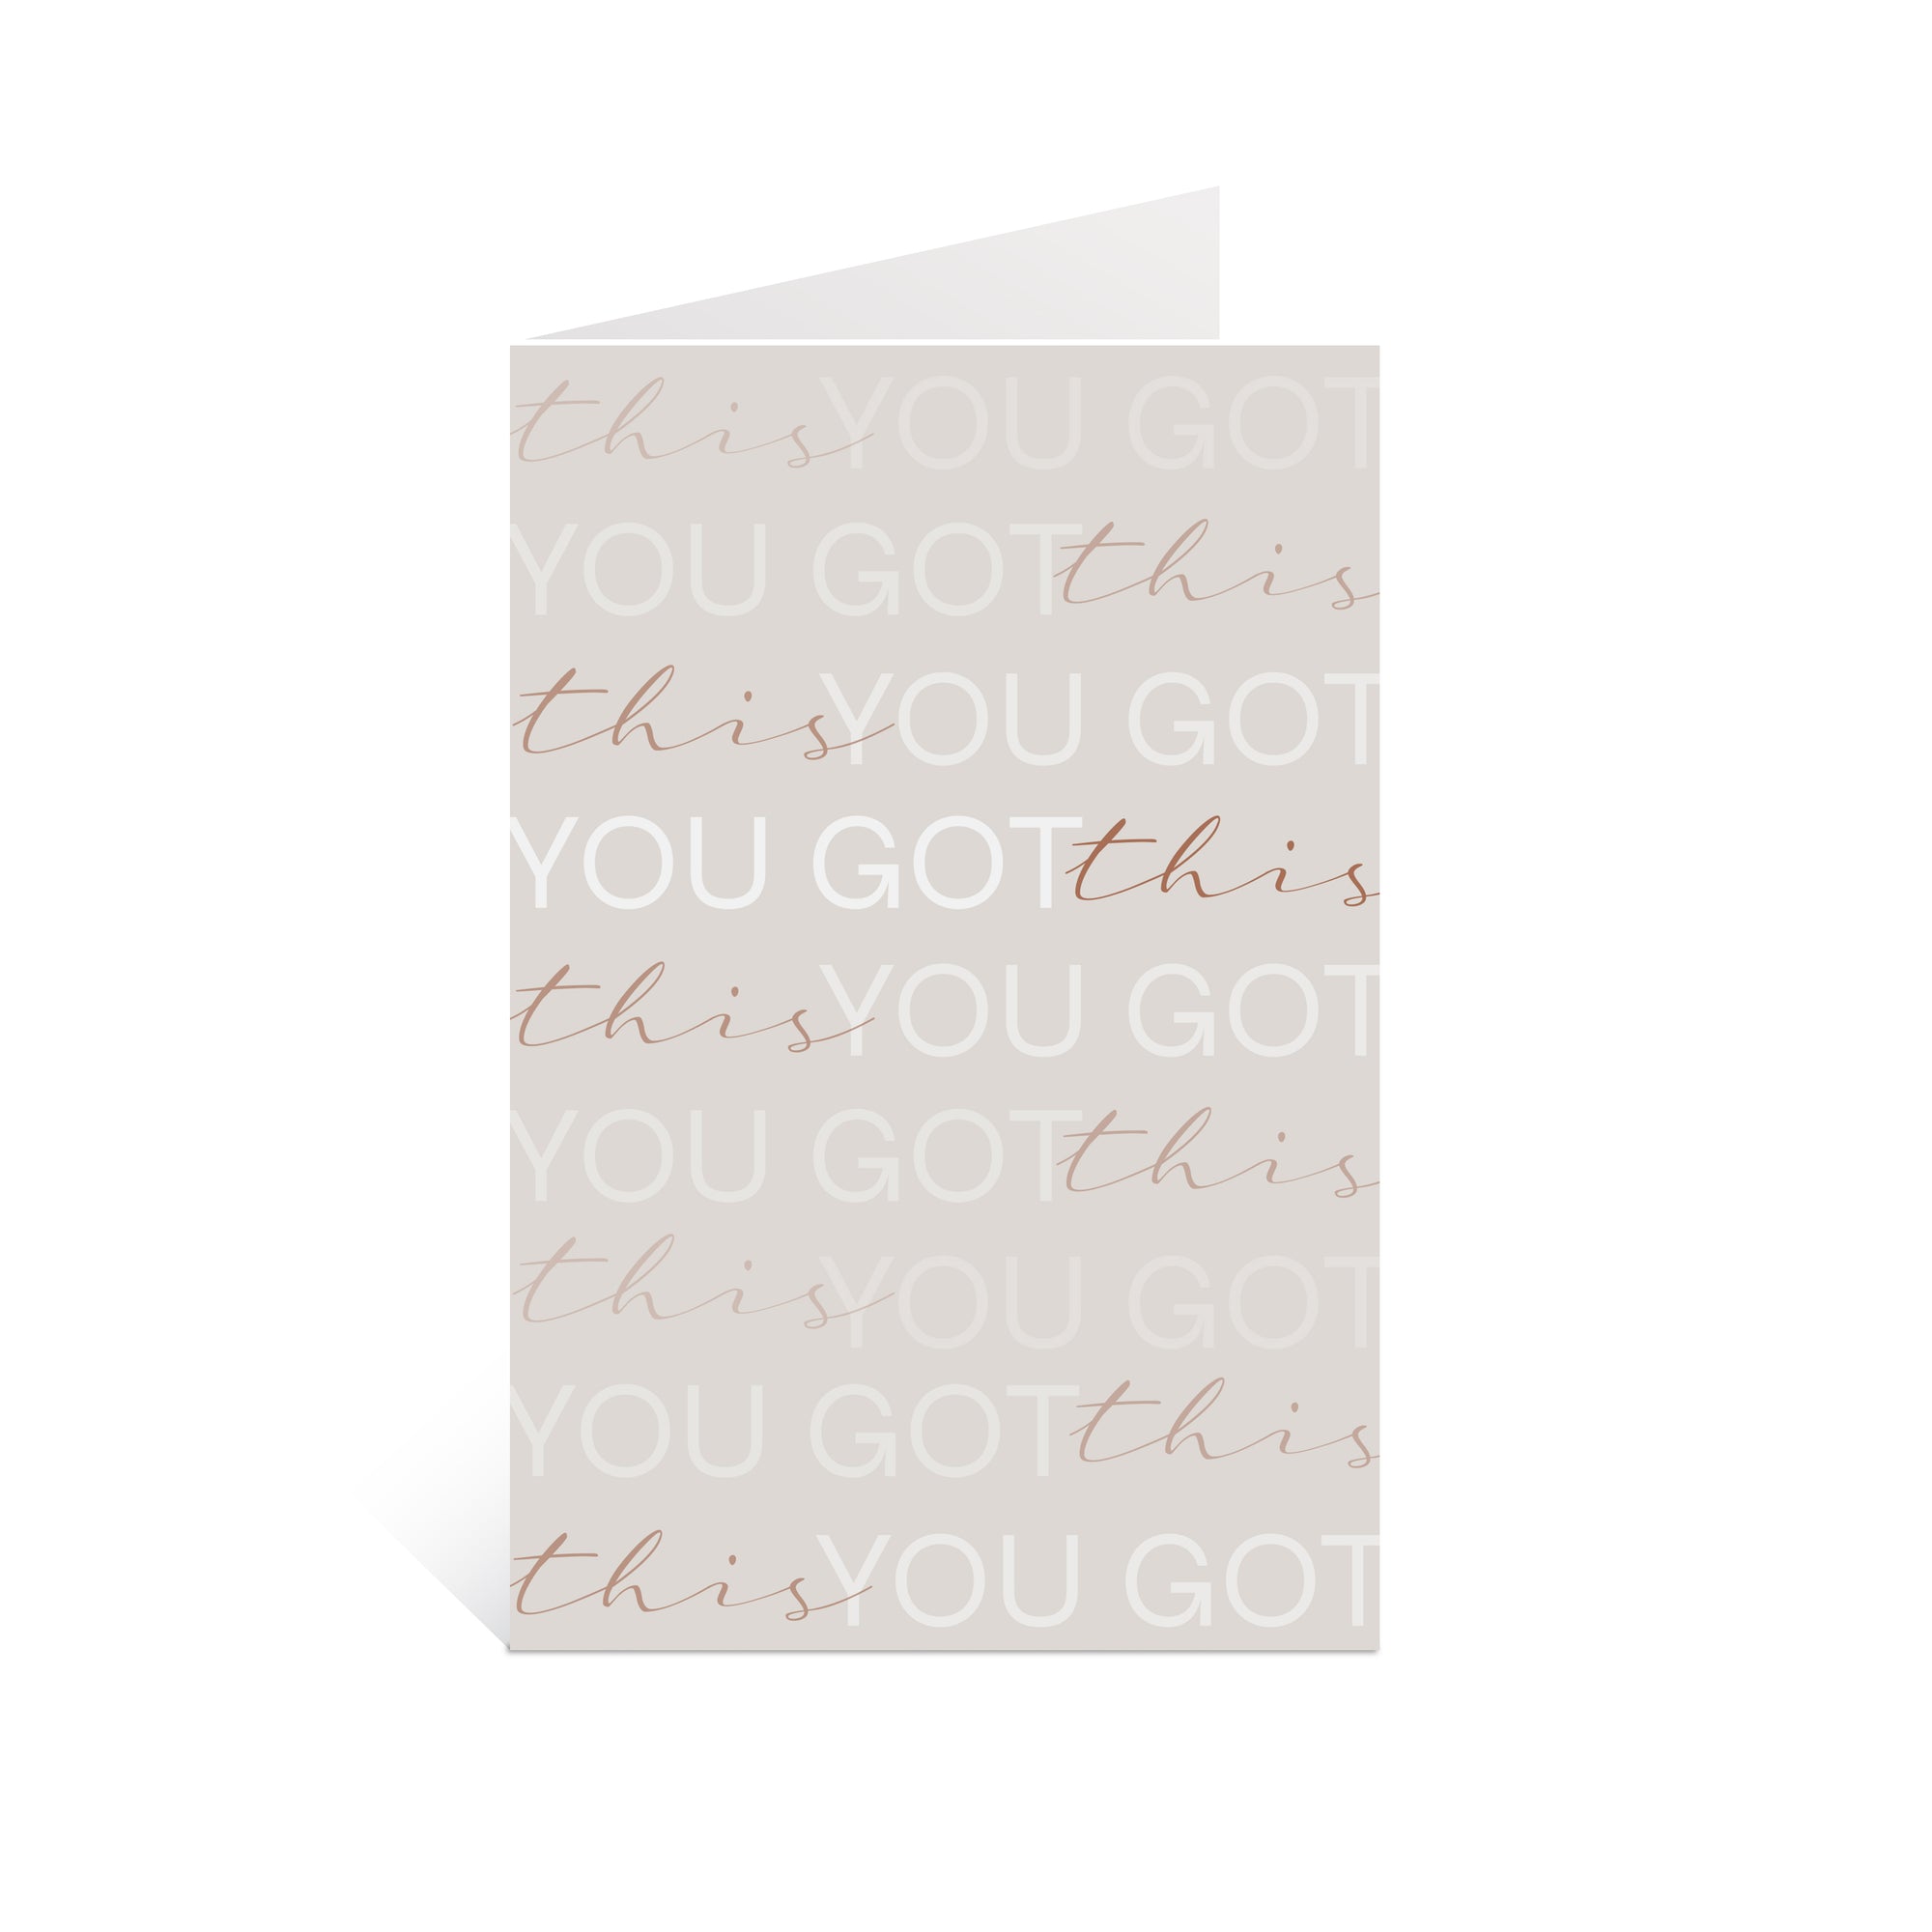 "You Got This" Greeting Card